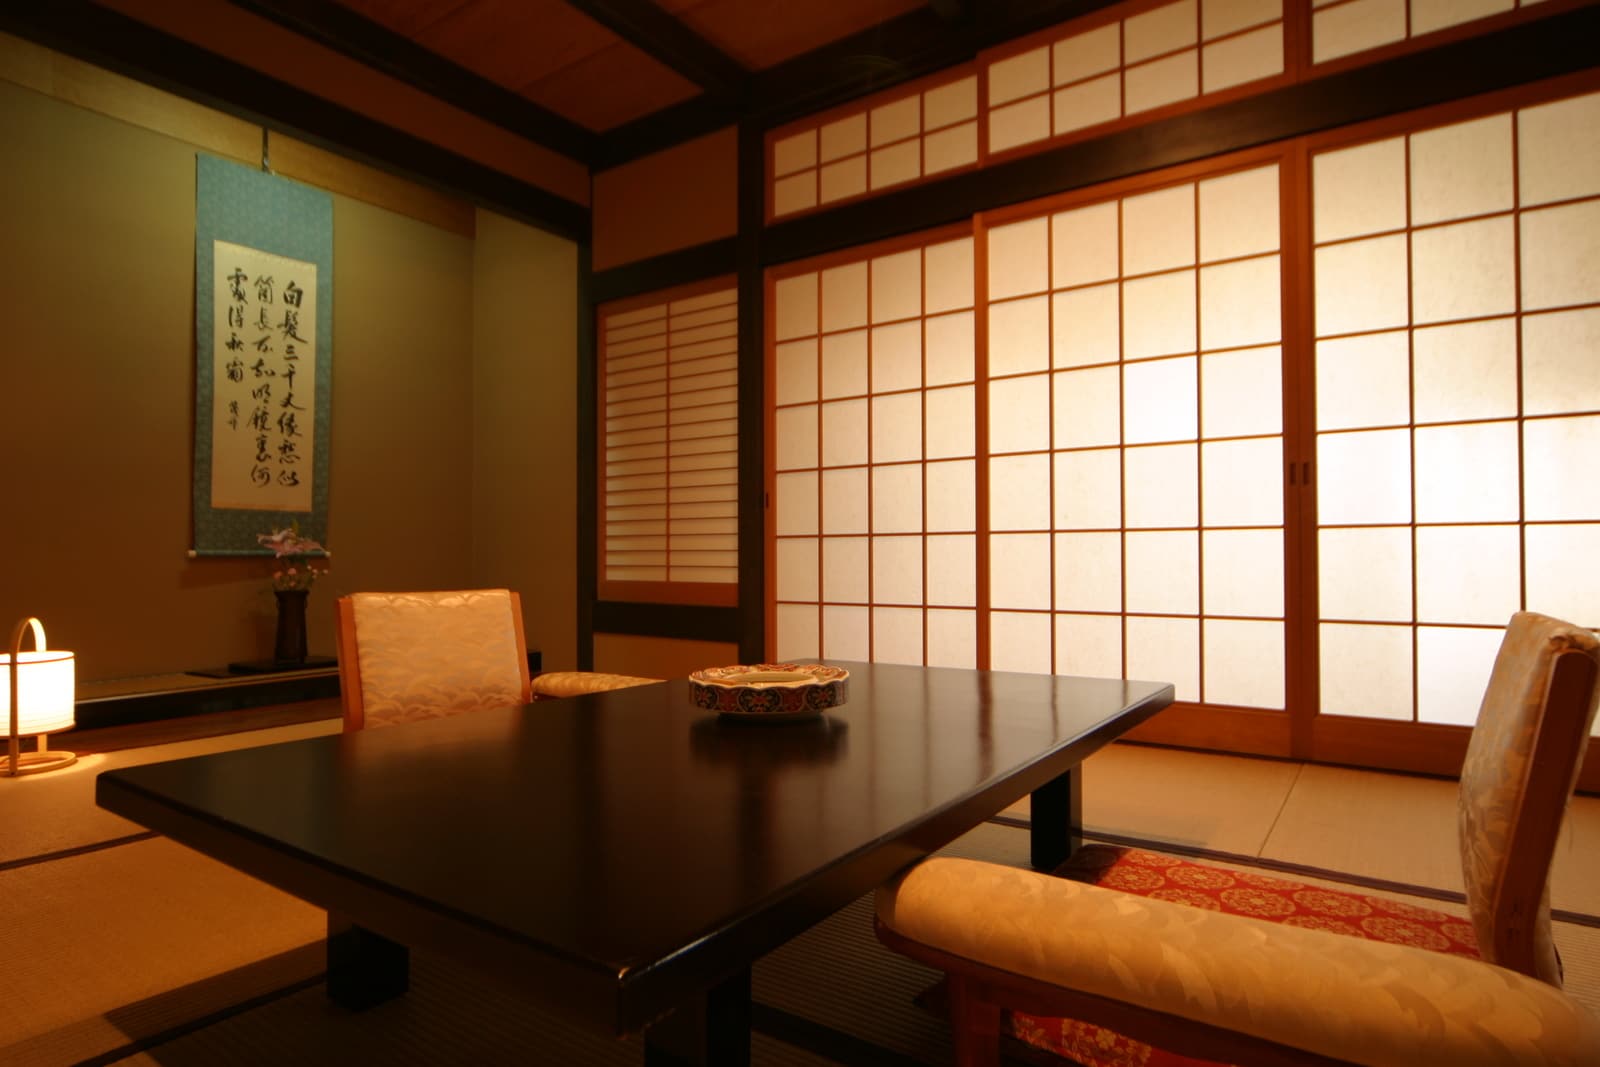 ★ Main building Japanese-style room (example)